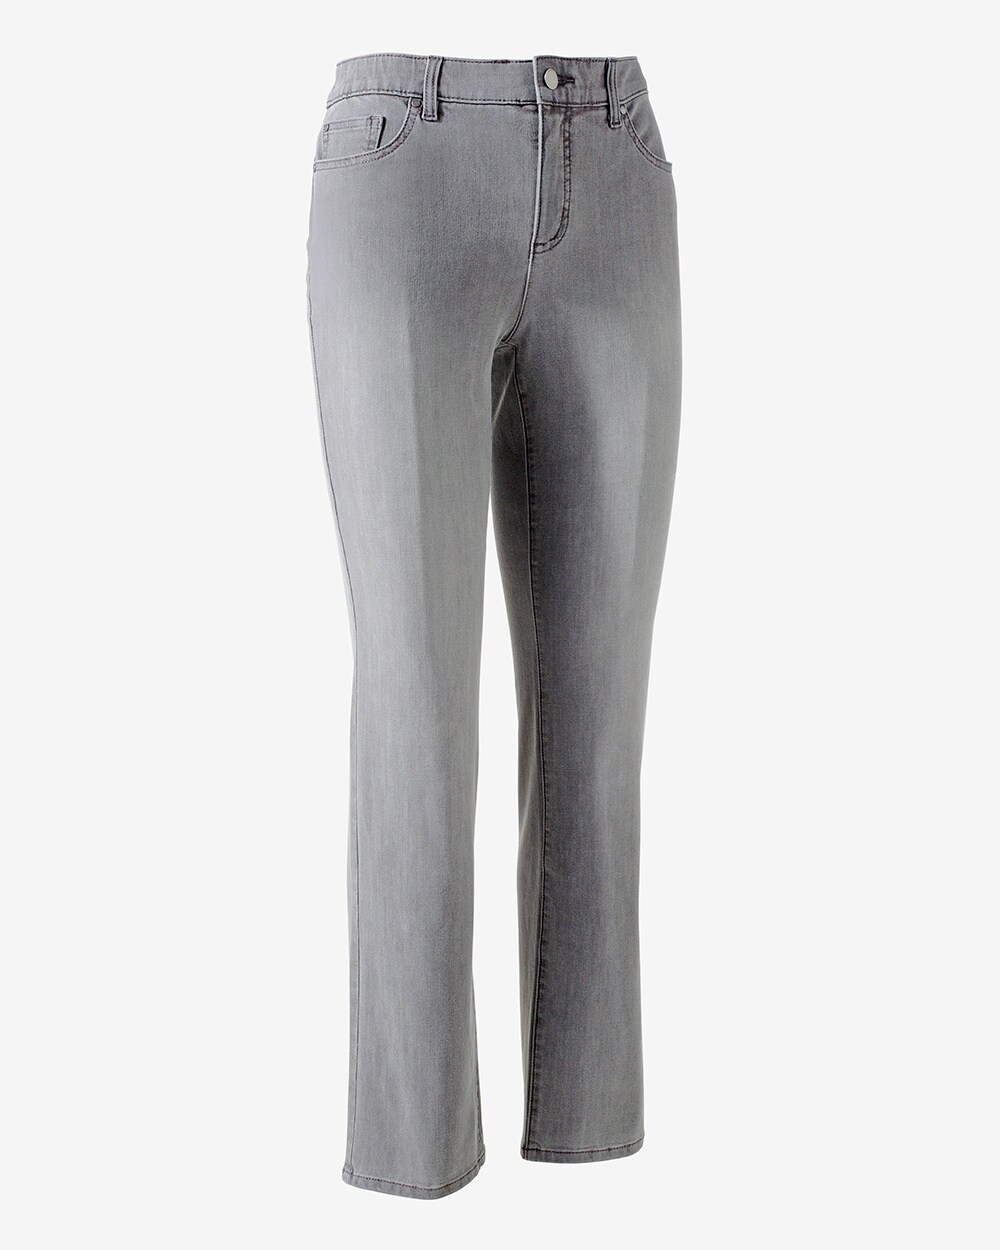 Ballade global ungdomskriminalitet Fabulously Slimming 4-Way Stretch Jeans - Chico's Off The Rack - Chico's  Outlet